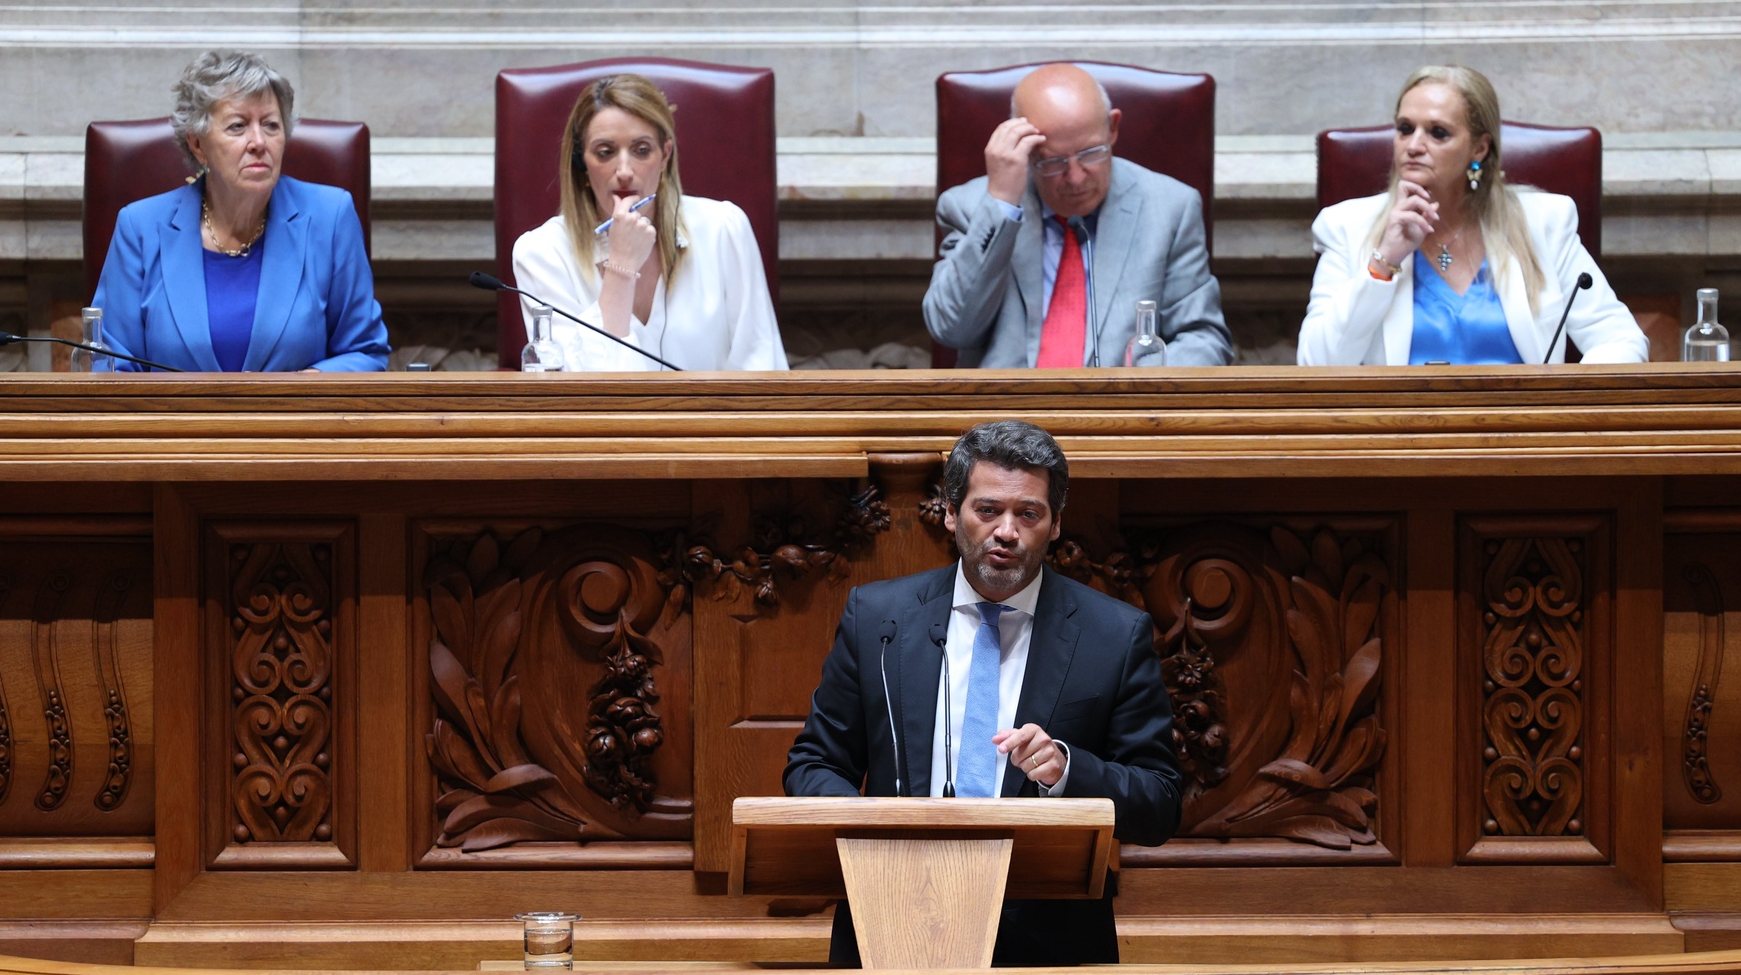 European Parliament President Roberta Metsola (2-L), flanked by her Portuguese counterpart, Augusto Santos Silva (2-R), listens to the speech of Andre Ventura, leader of Chega (Enough) Party, during her visit to the Portuguese Parliament, in Lisbon, Portugal, 16 June 2023. MIGUEL A. LOPES/LUSA